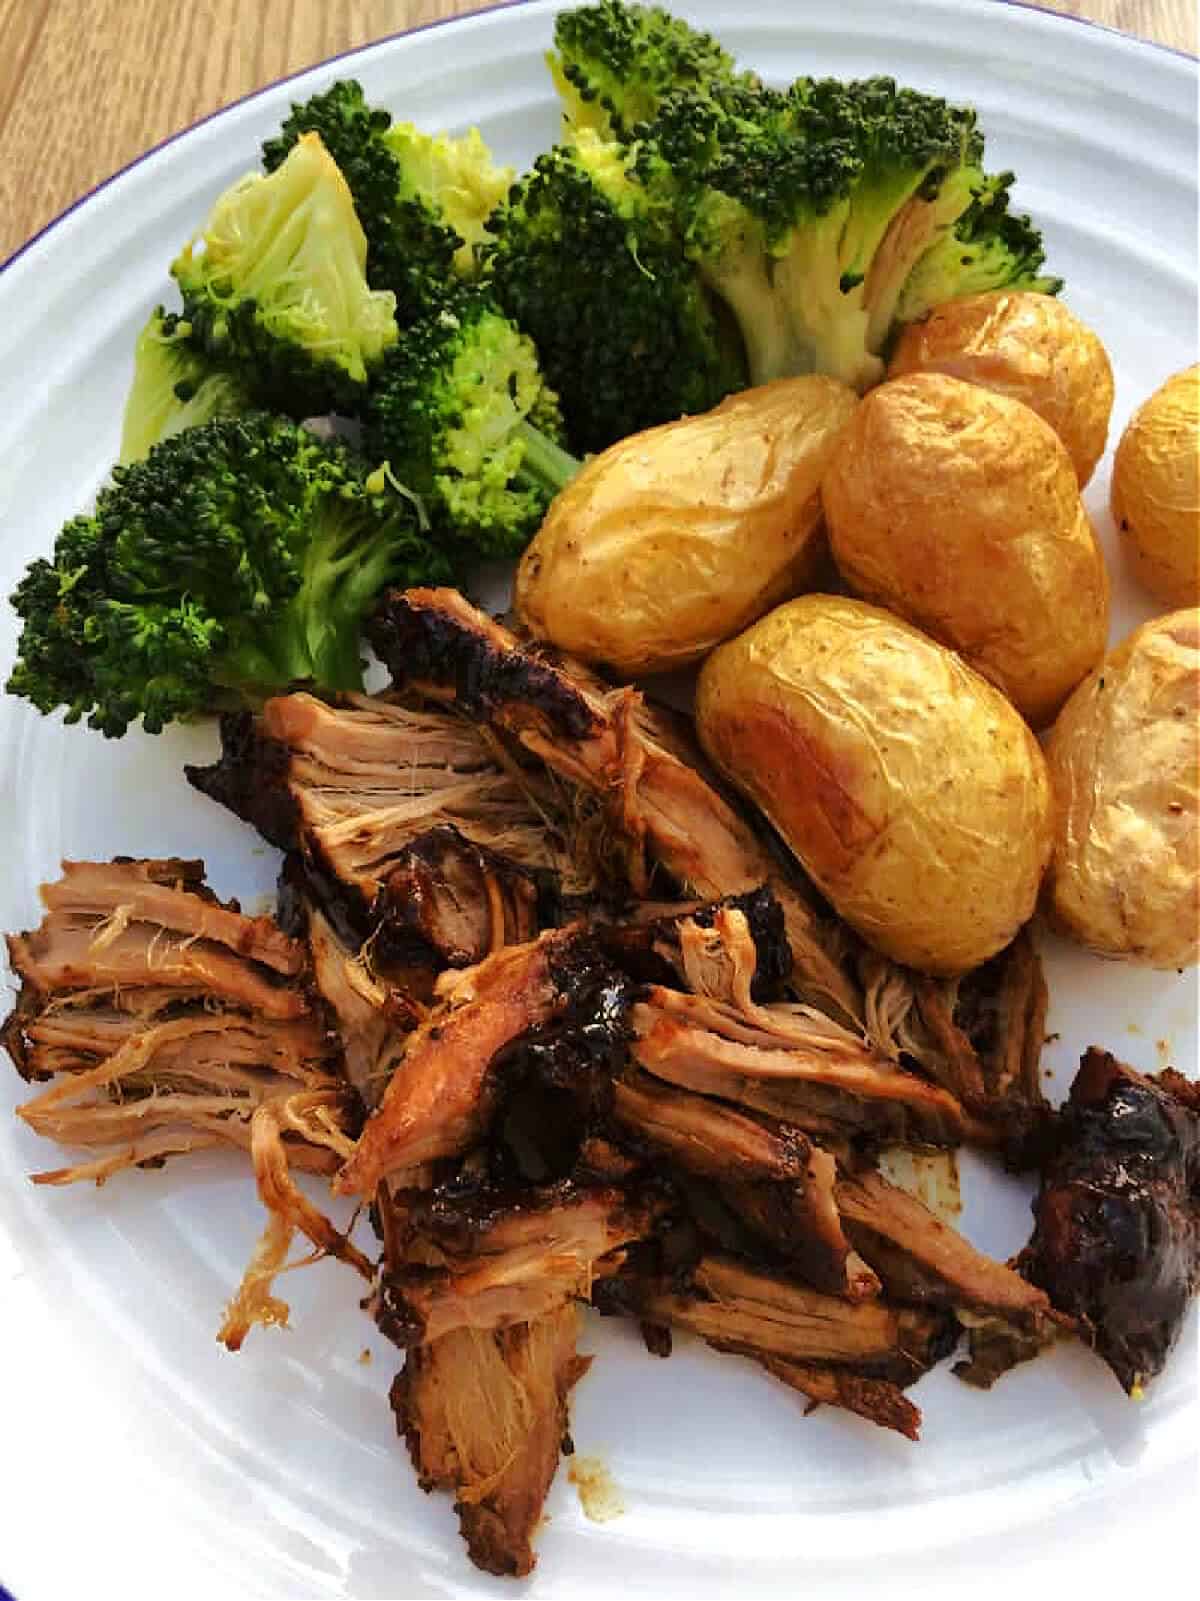 Shredded pork fillet served on a white plate with roasted new potatoes and broccoli.